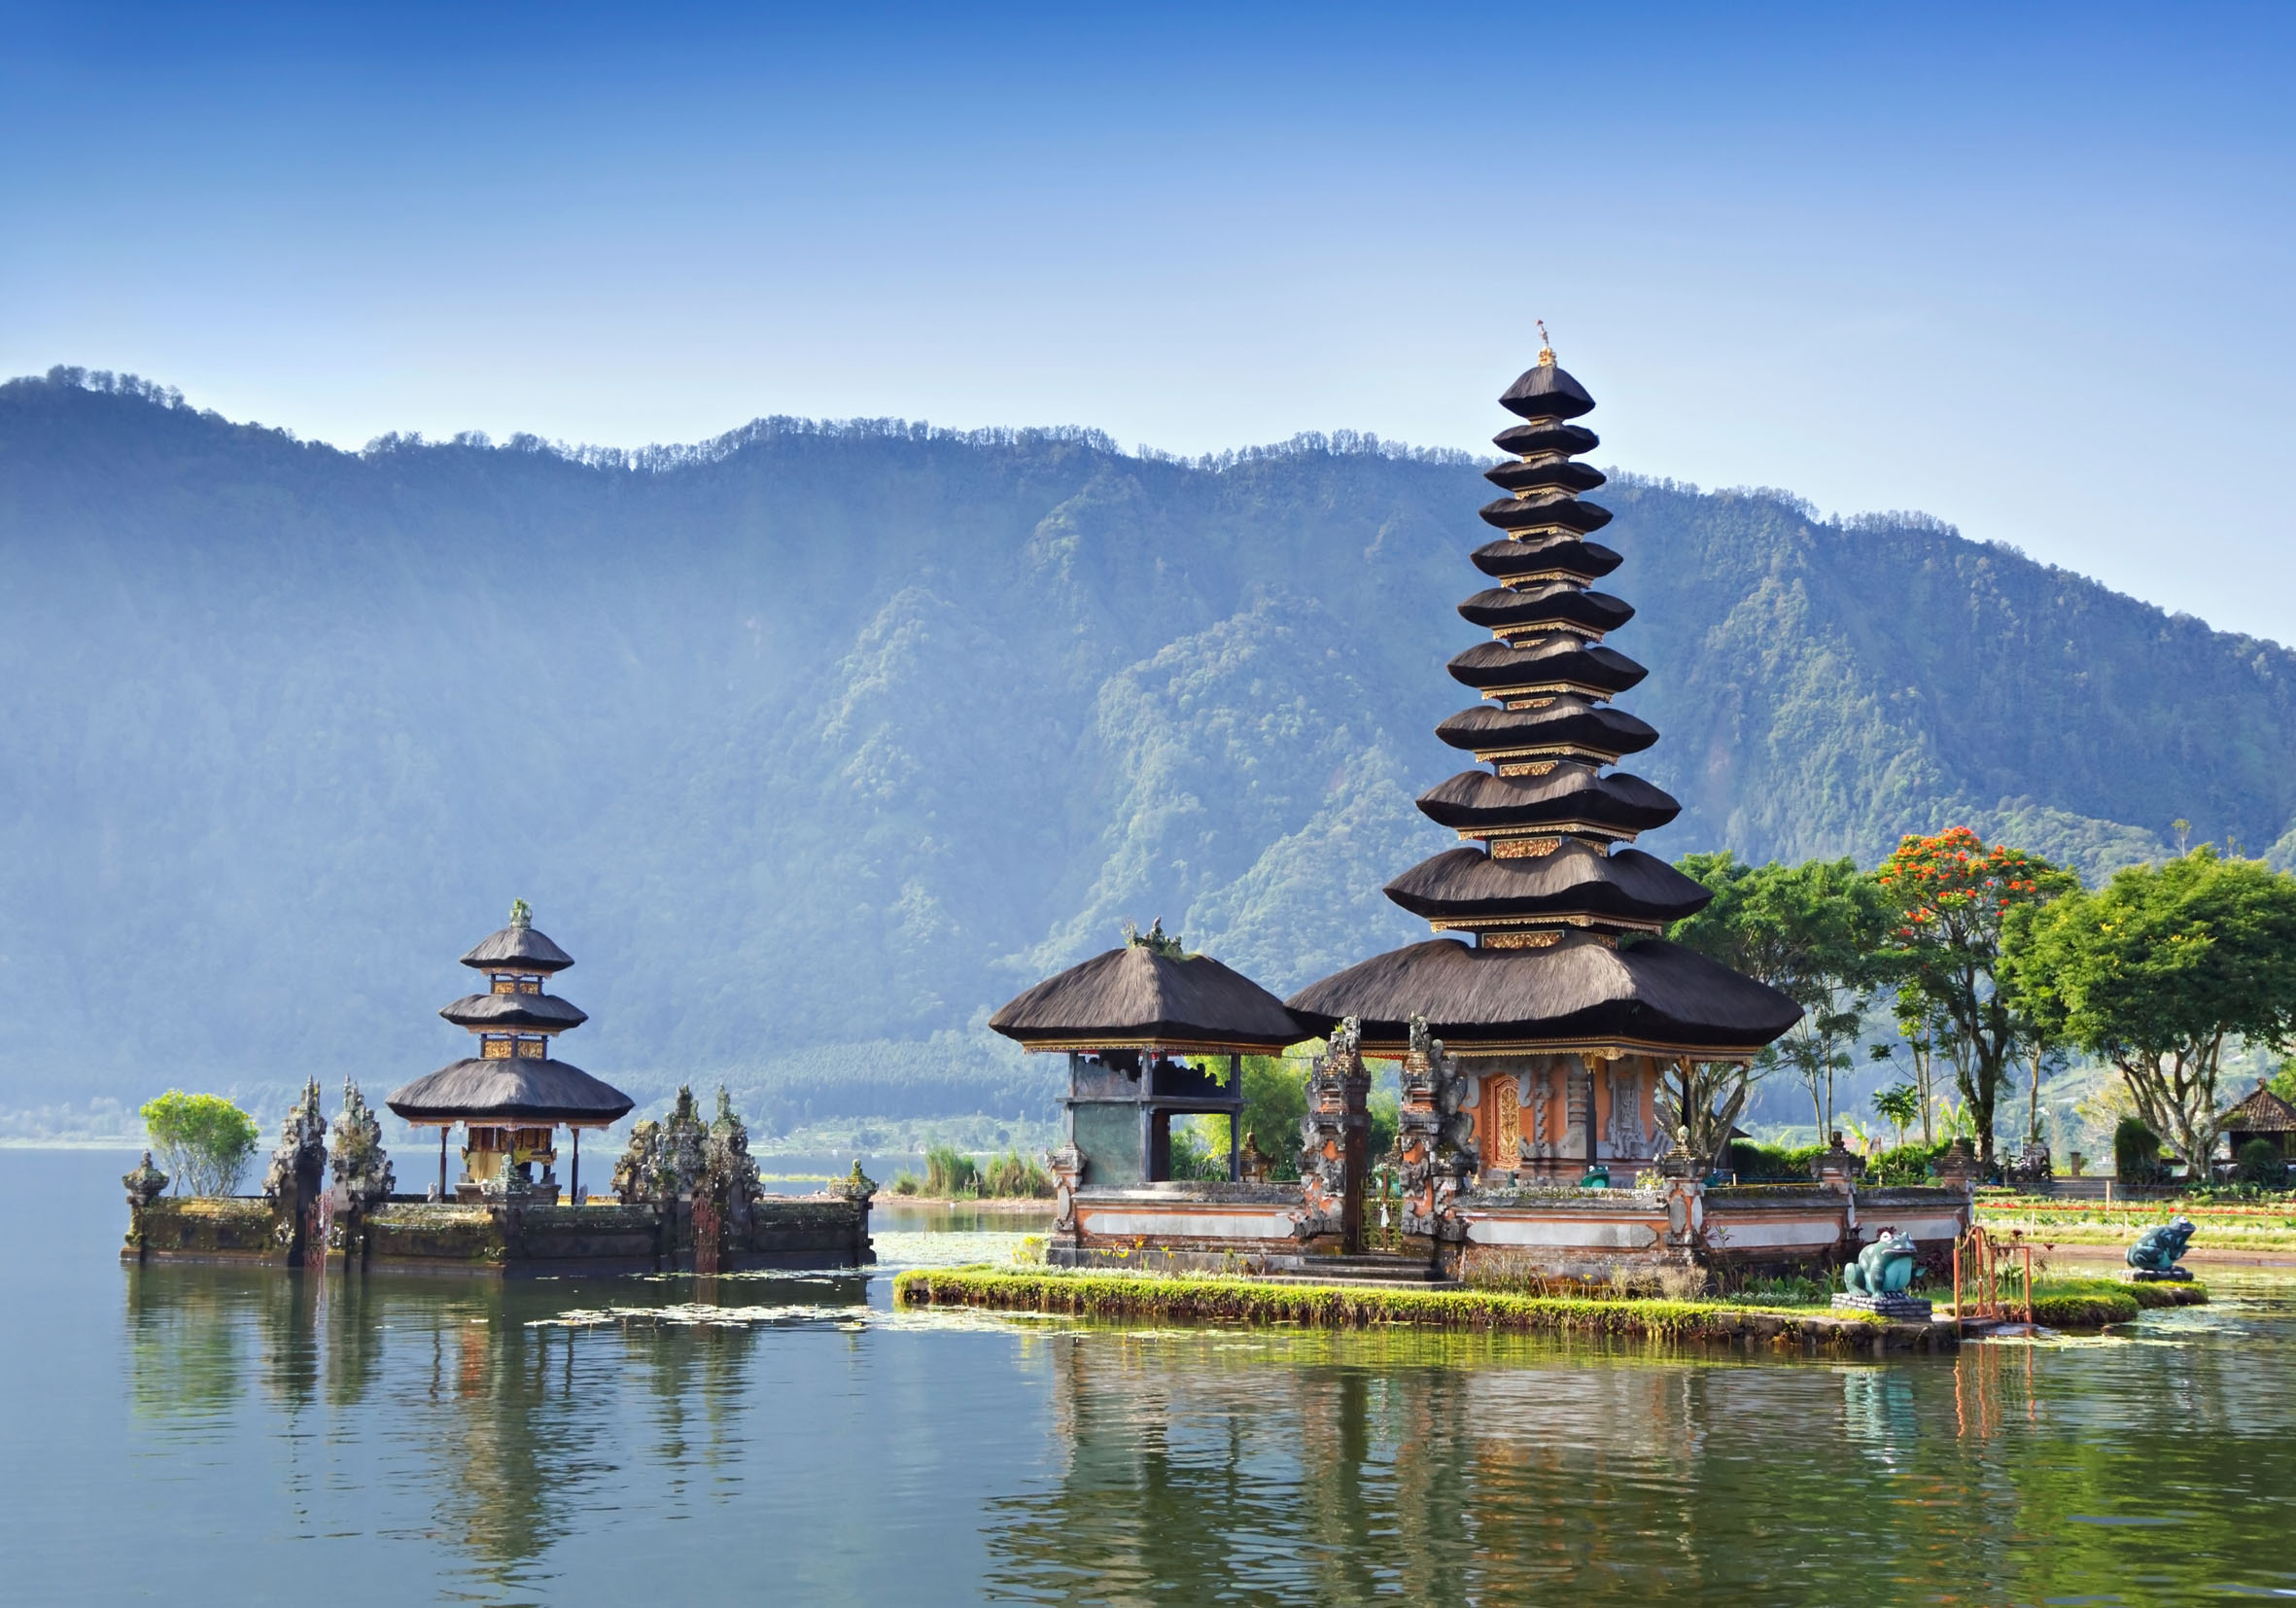 How to Visit a Balinese Temple